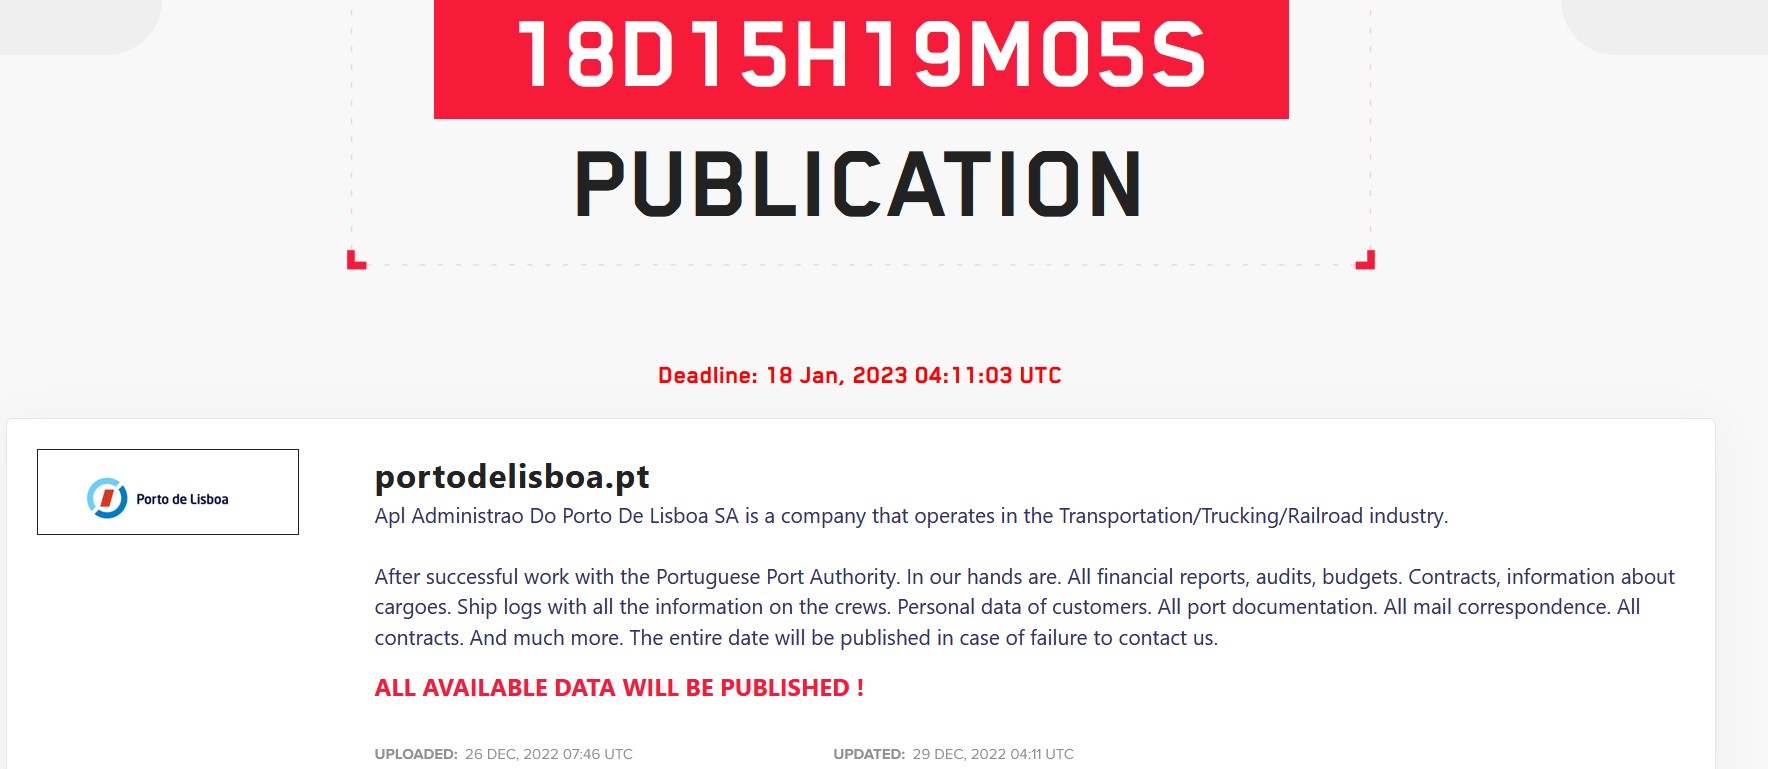 Lockbit ransomware gang claims to have hacked the Port of Lisbon